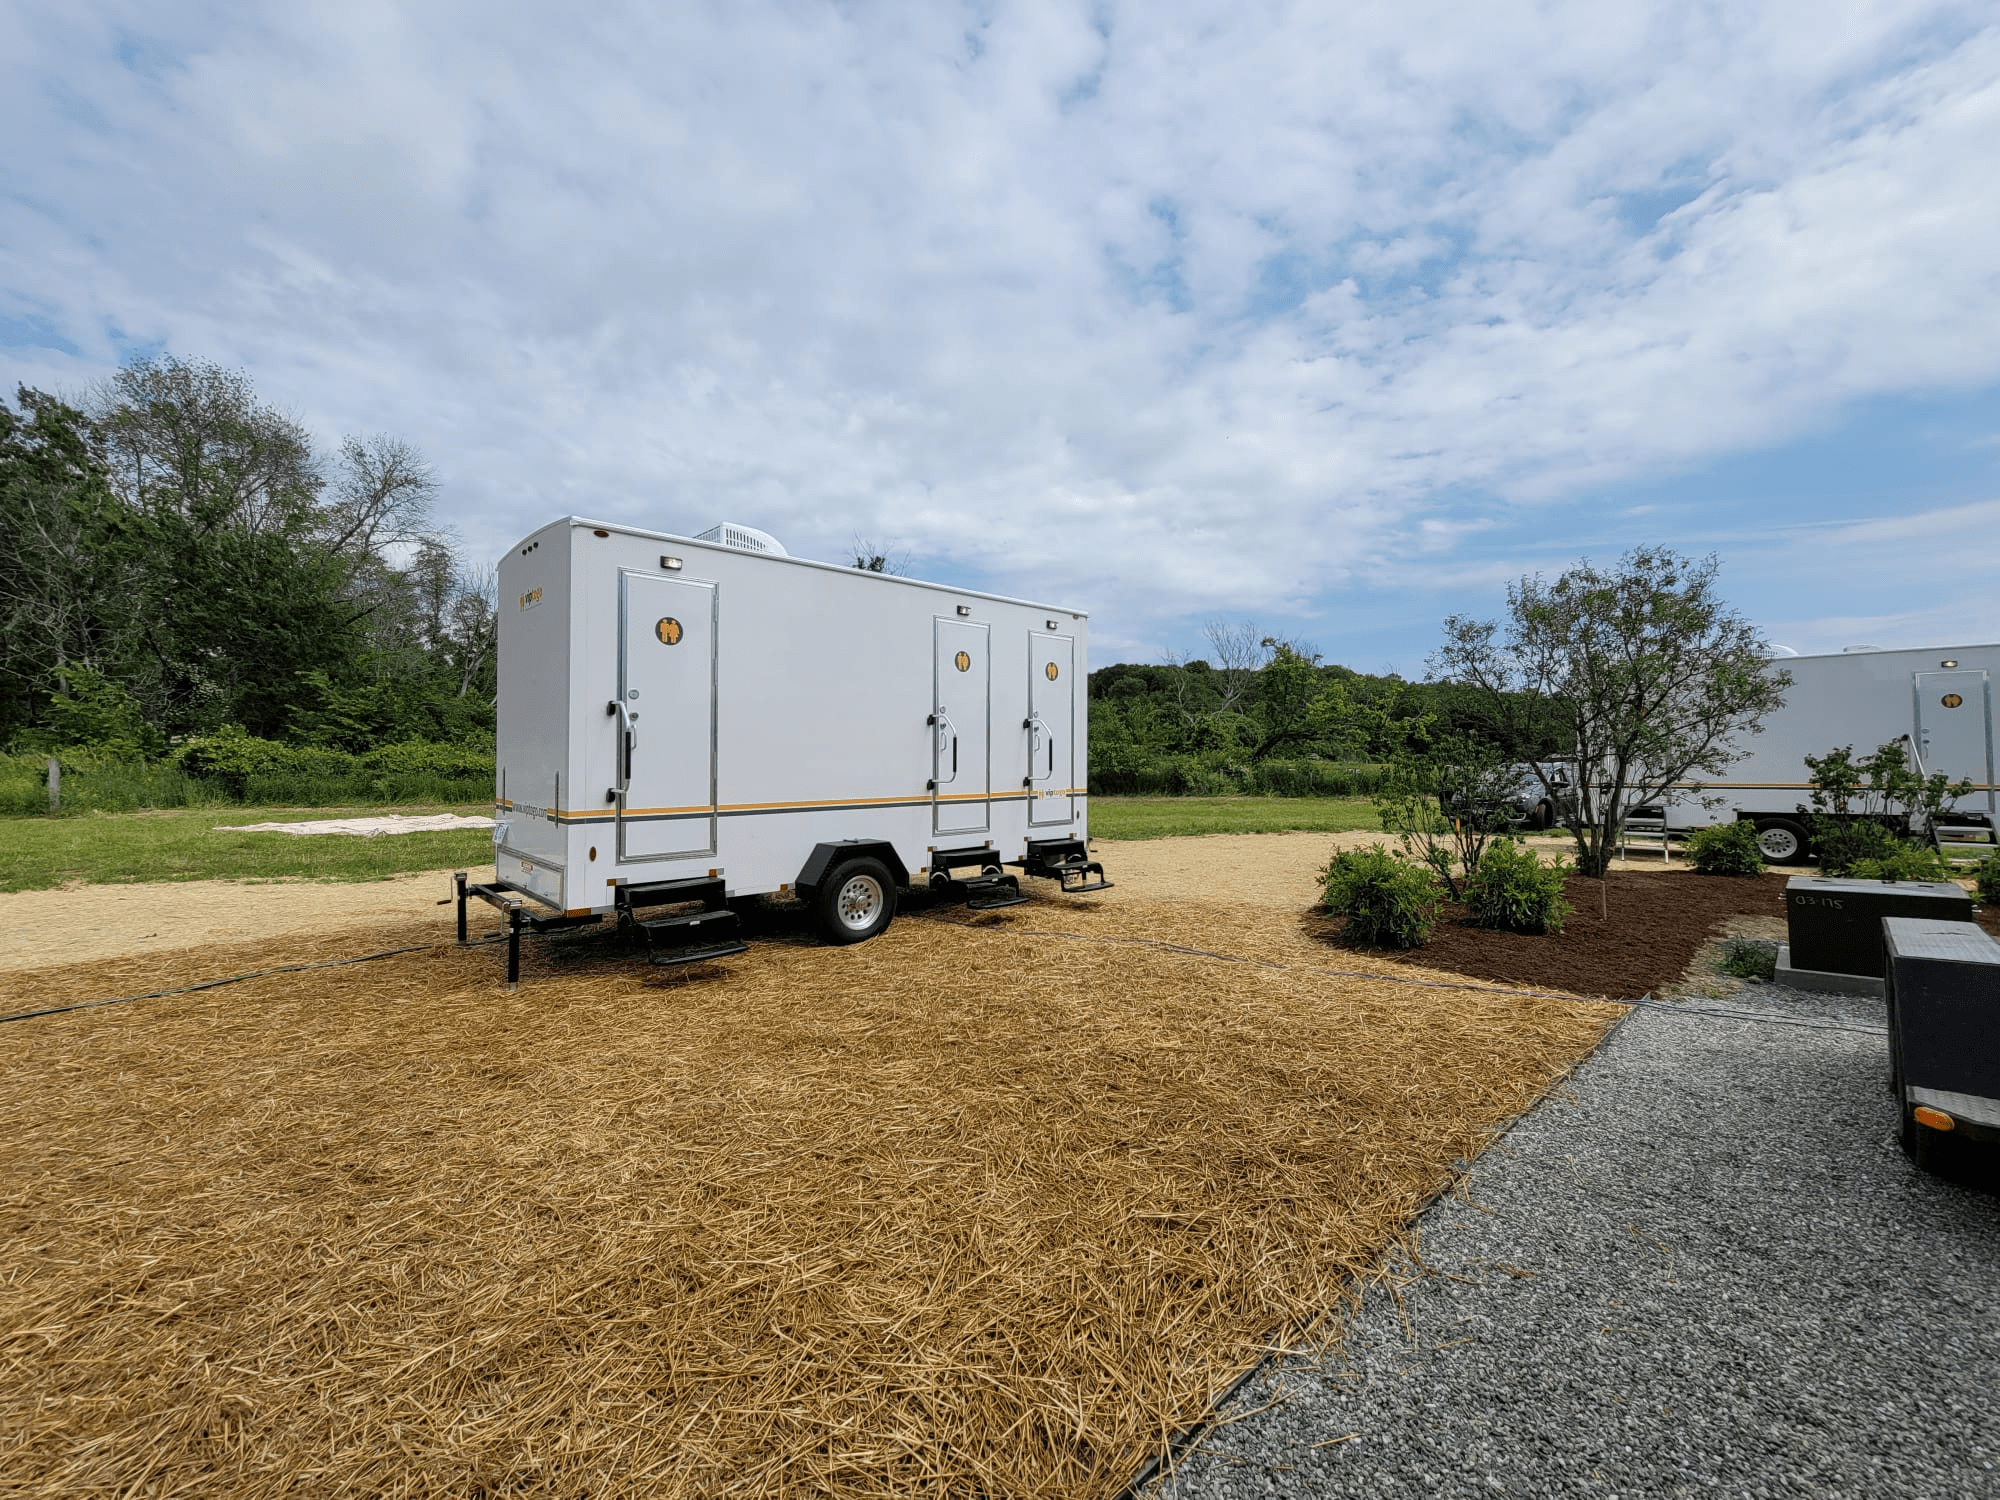 Restroom trailers positioned at an outdoor event